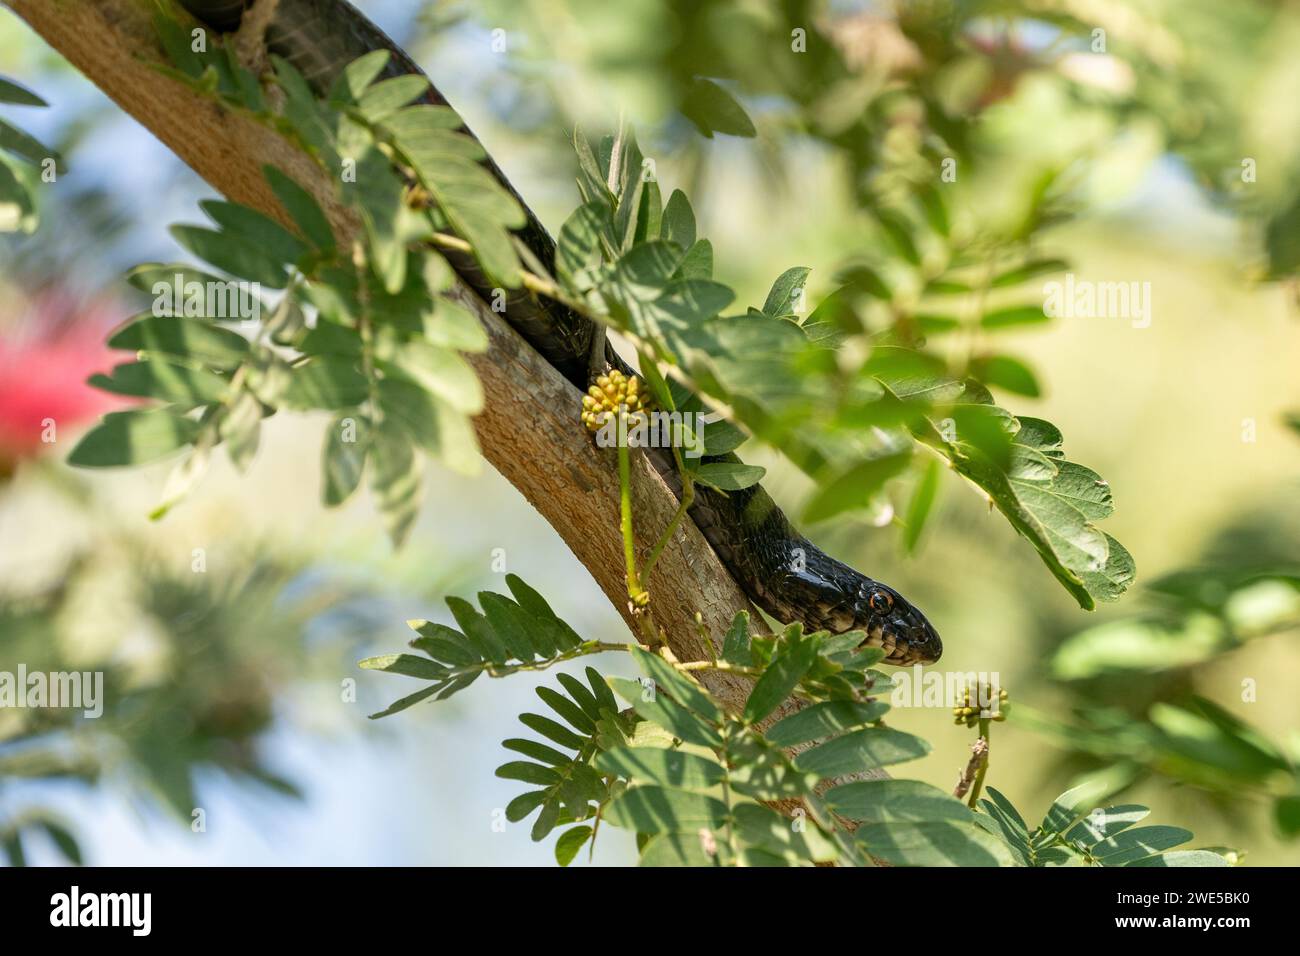 Dolichophis jugularis, also known commonly as the black whipsnake and the large whip snake, Stock Photo